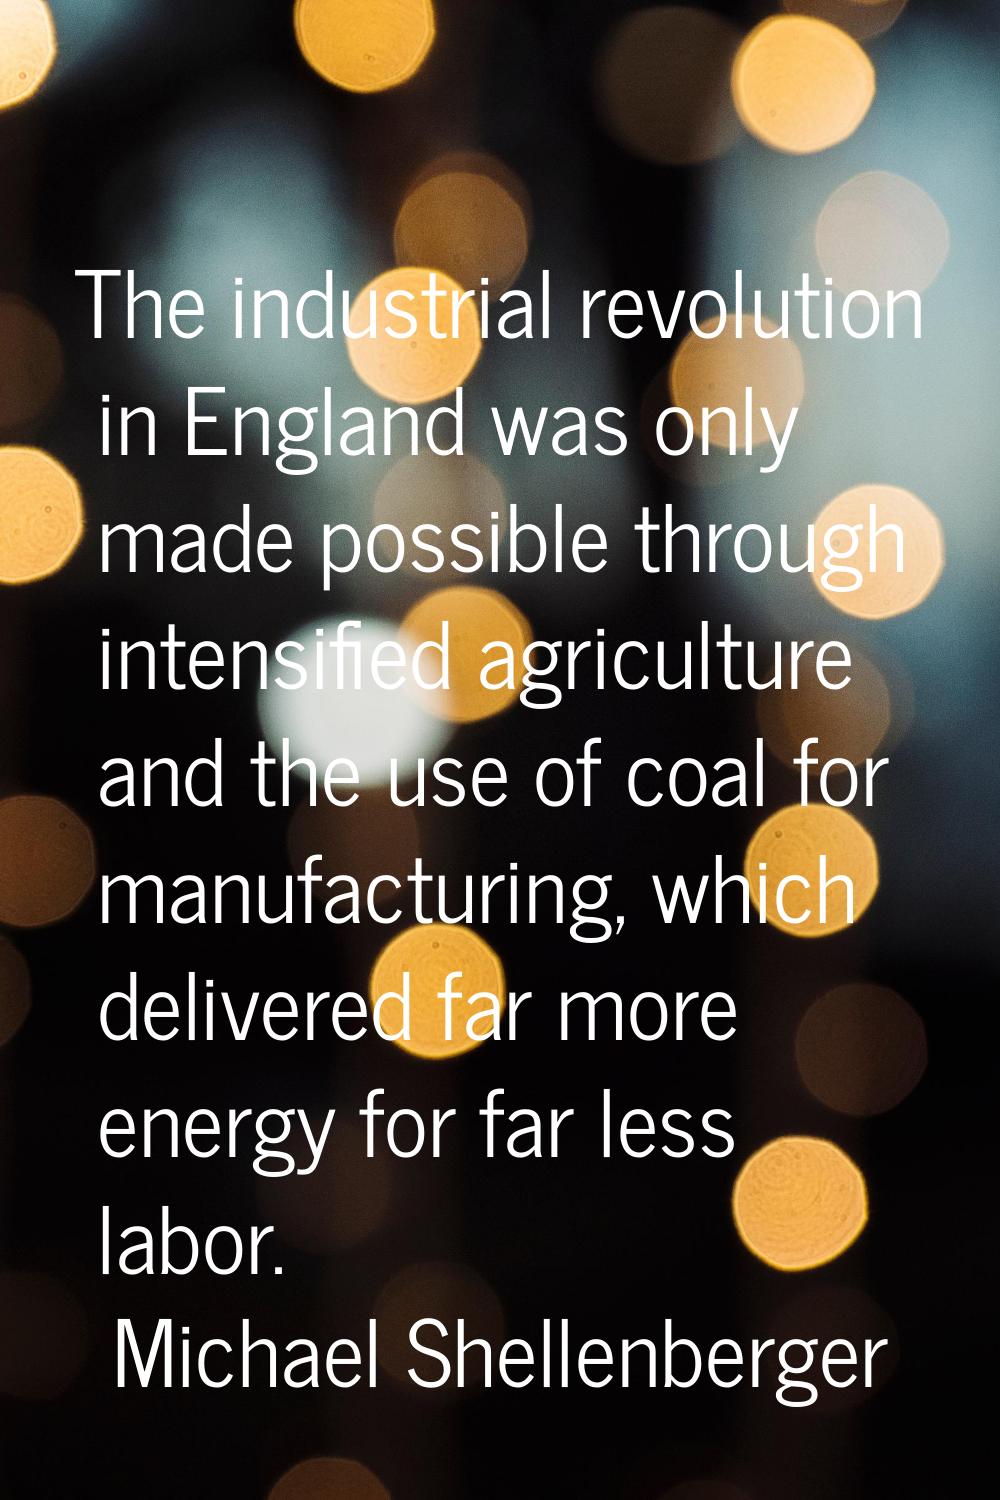 The industrial revolution in England was only made possible through intensified agriculture and the